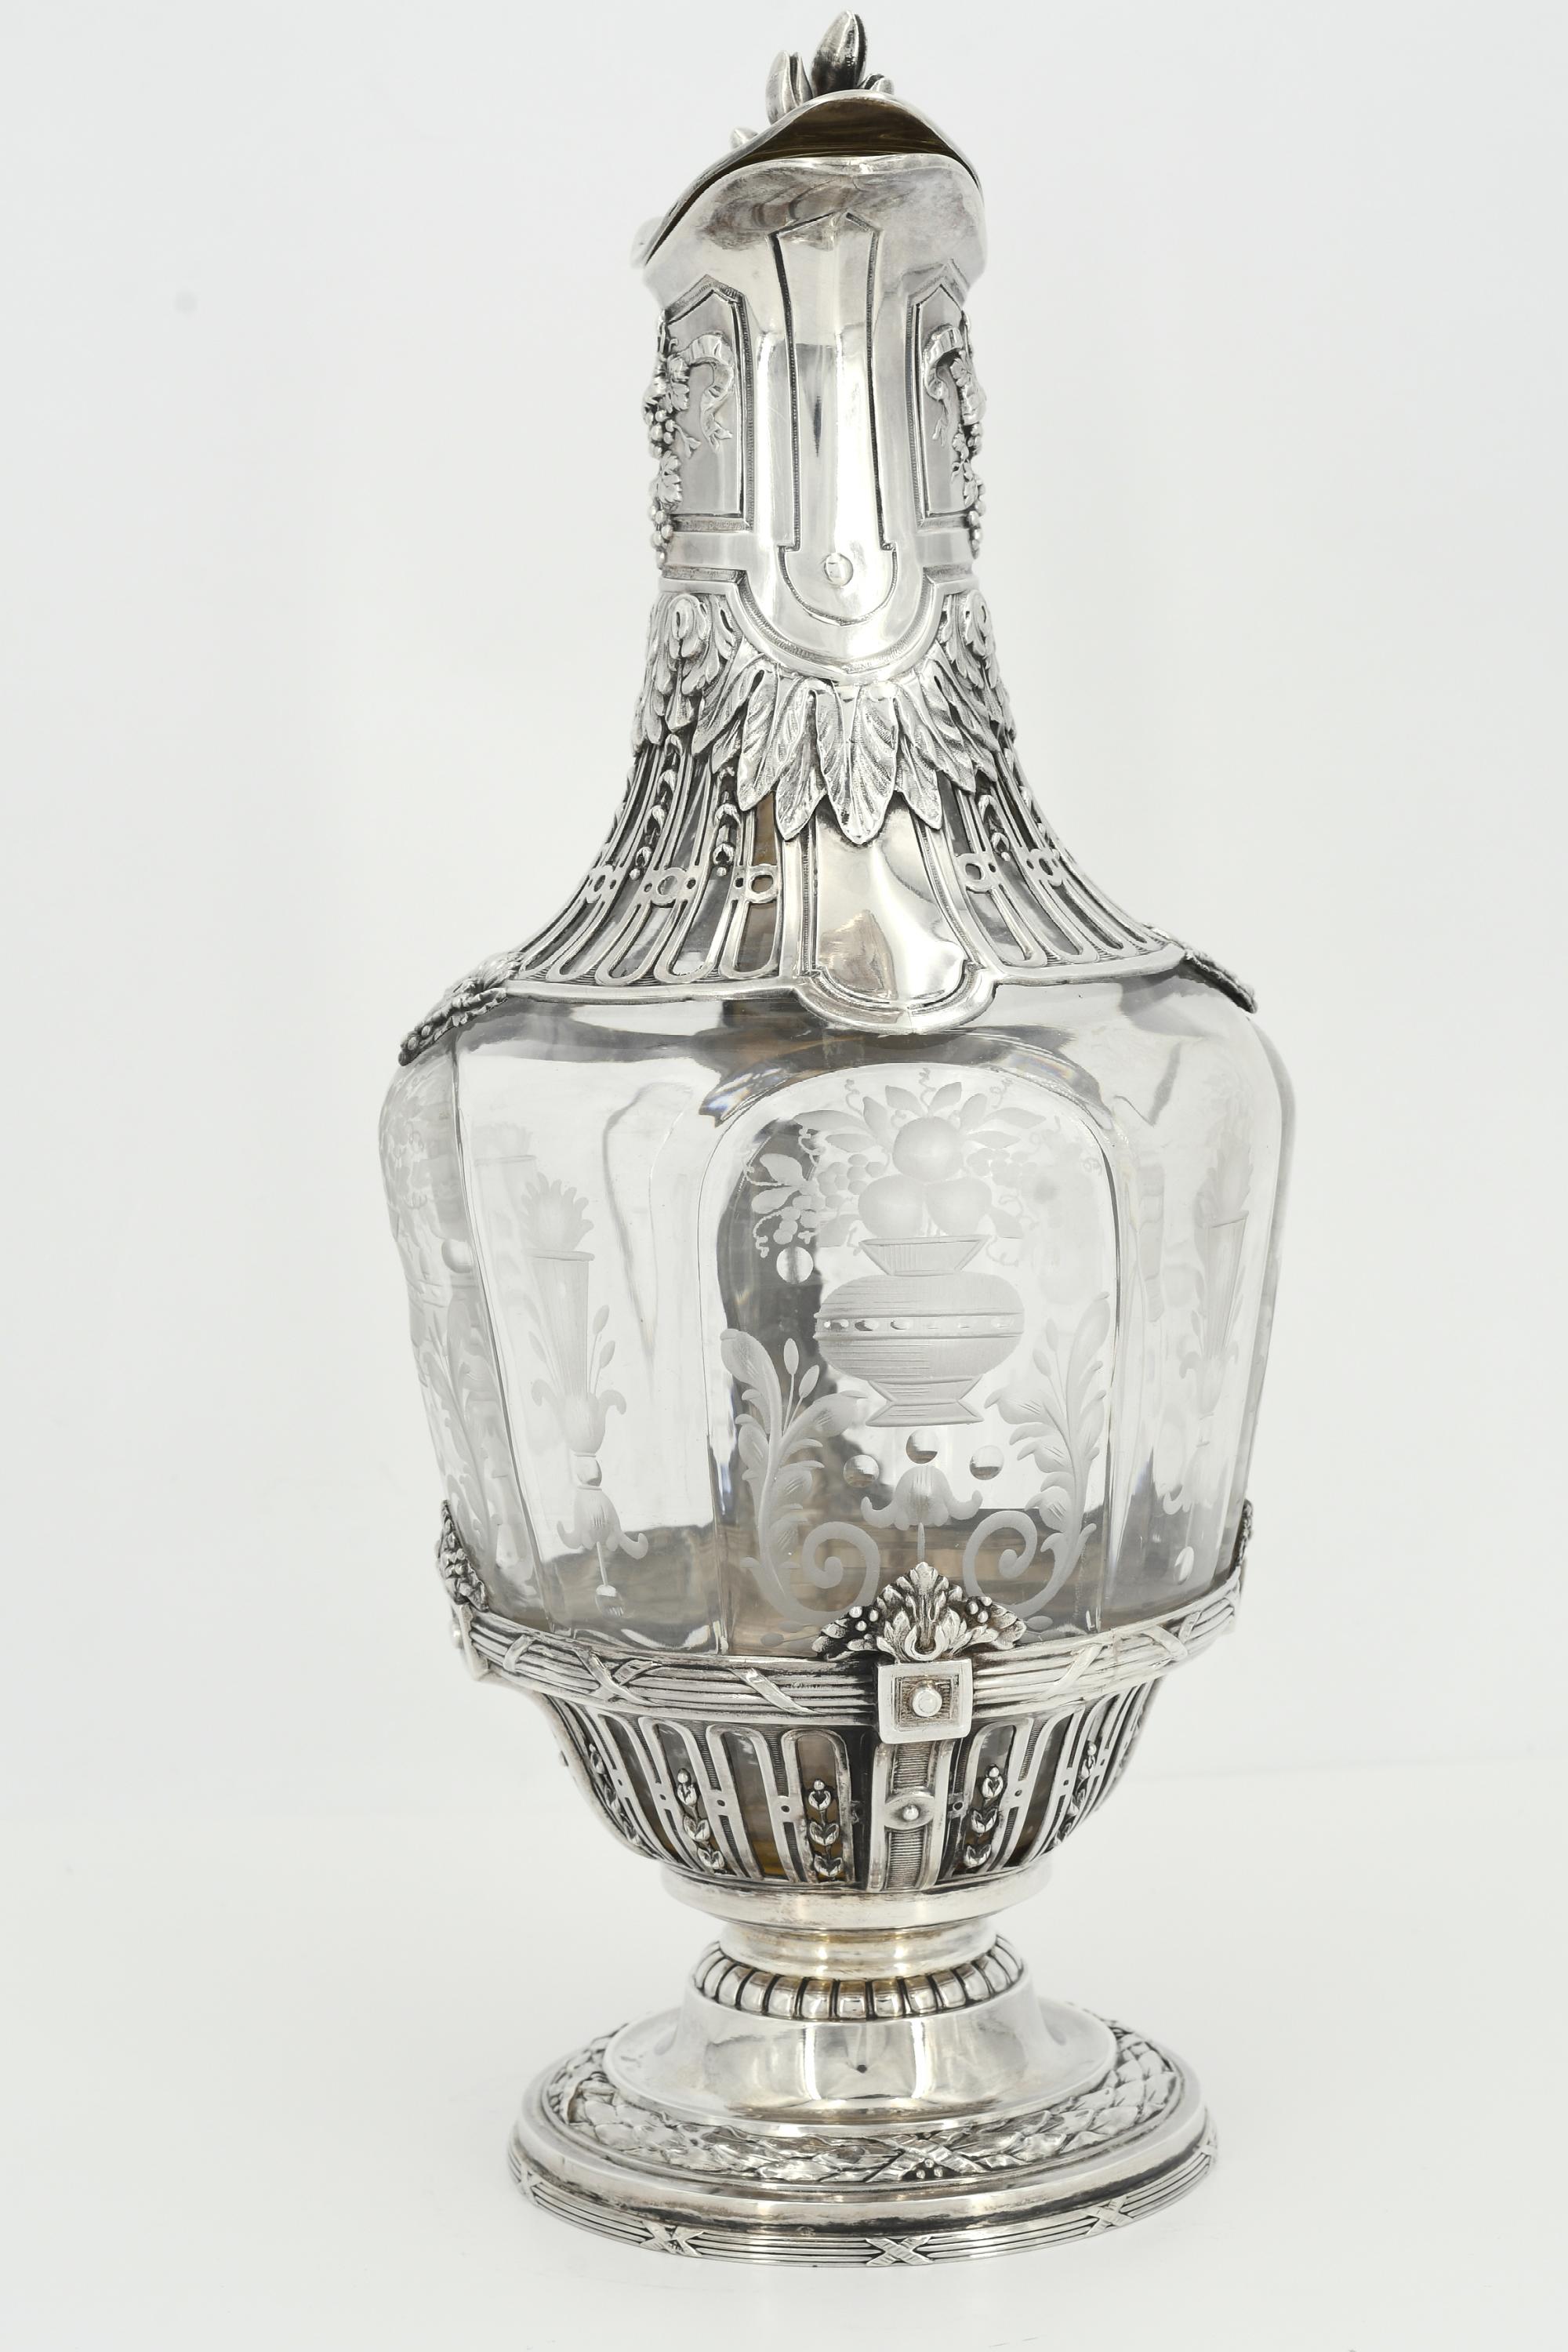 Silver and glass carafe with flower knob and laurel décor - Image 5 of 7